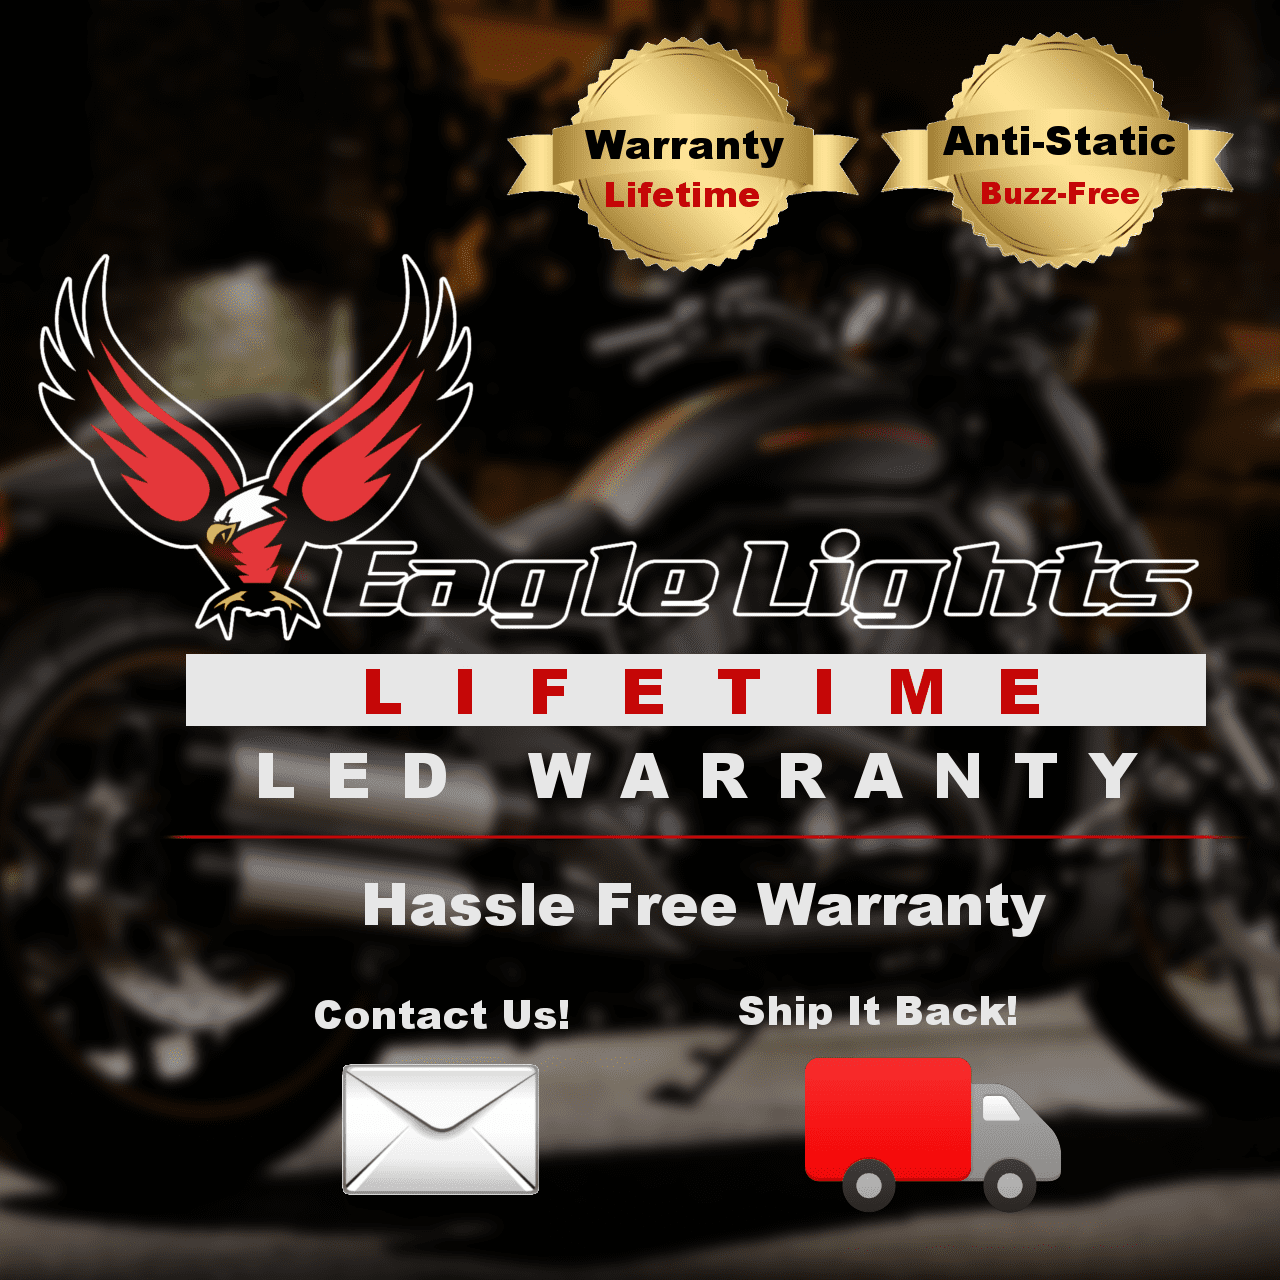 3 ¼” LED Rear Turn Signals - Eagle Lights Generation II 3 1/4" Red Rear LED Turn Signals For Harleys - Double Pack - 1156 Base